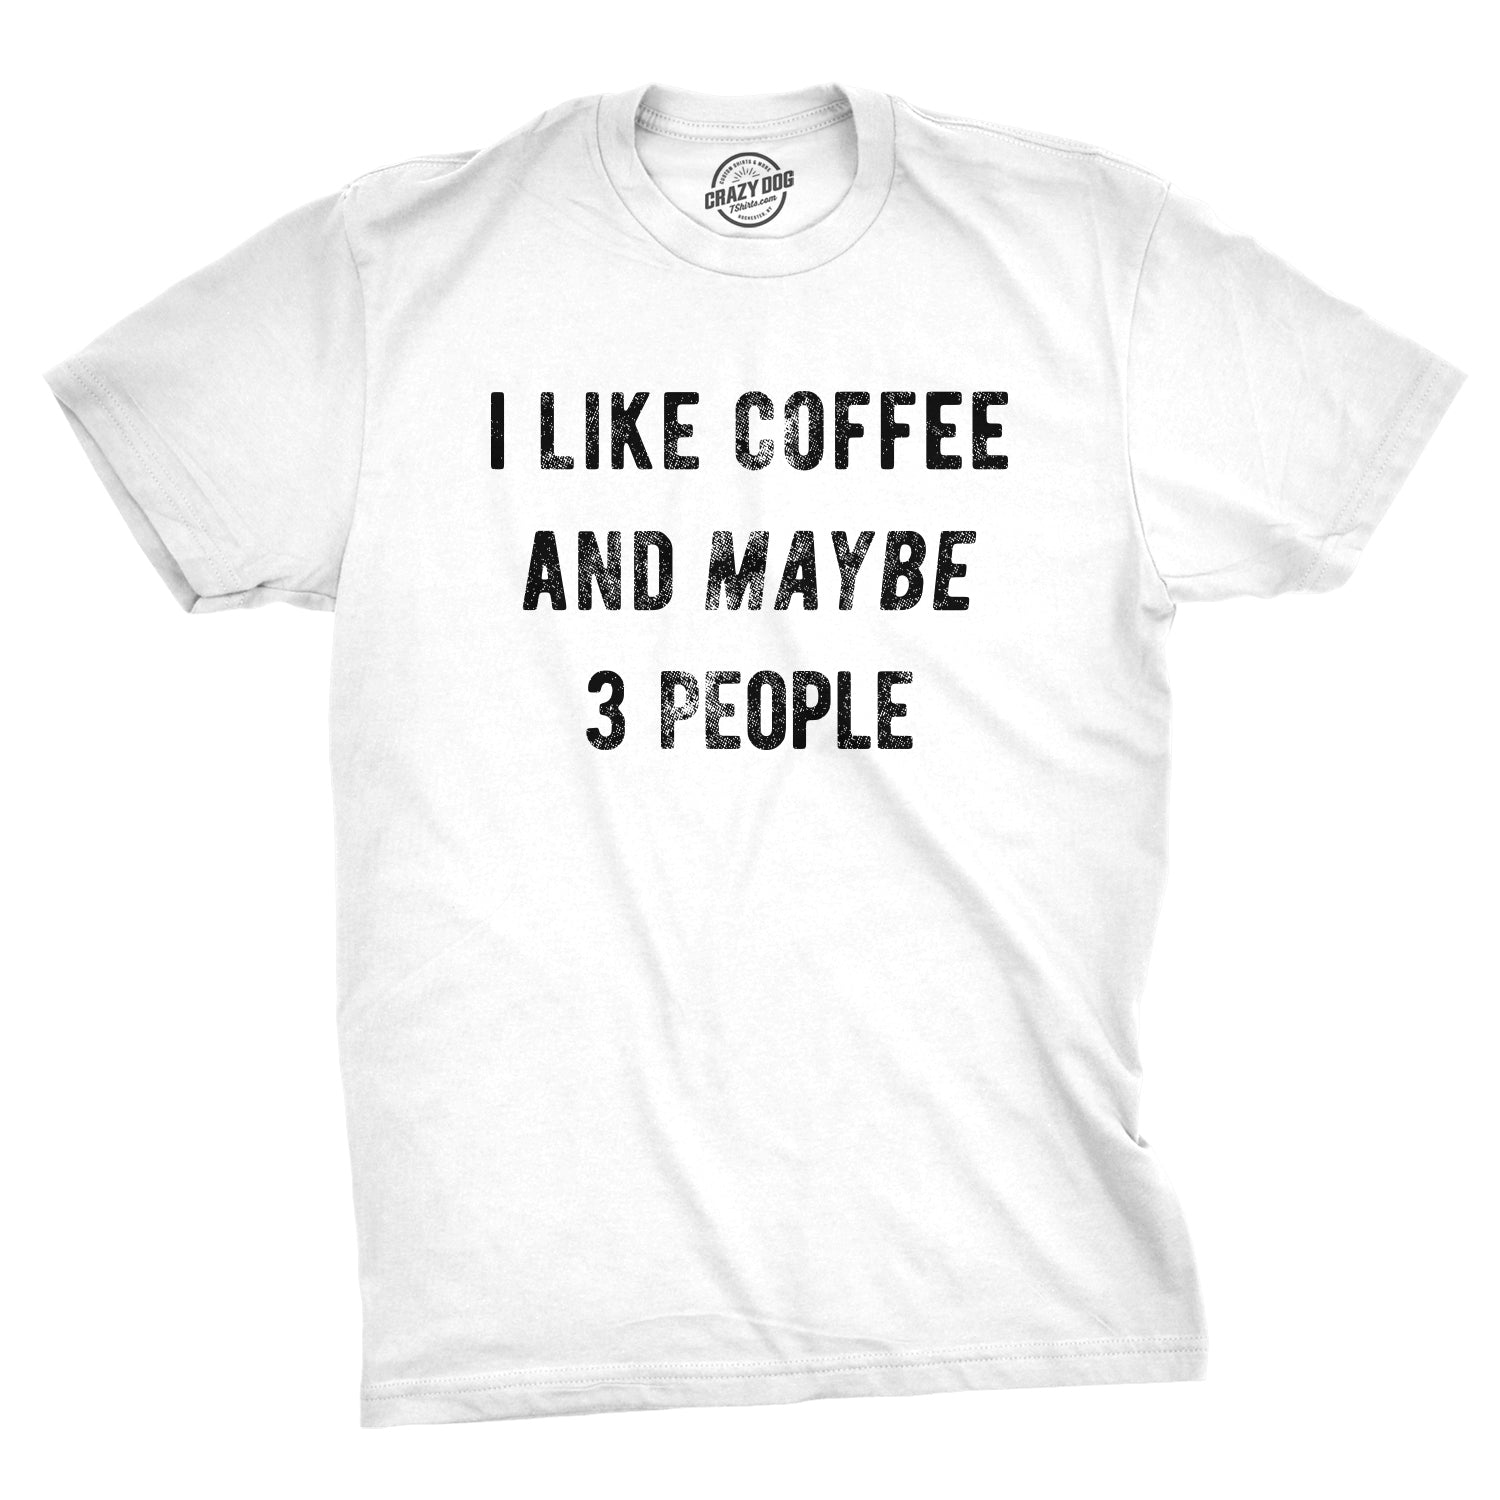 I Like Coffee And Maybe 3 People Men's Tshirt – Crazy Dog T-Shirts